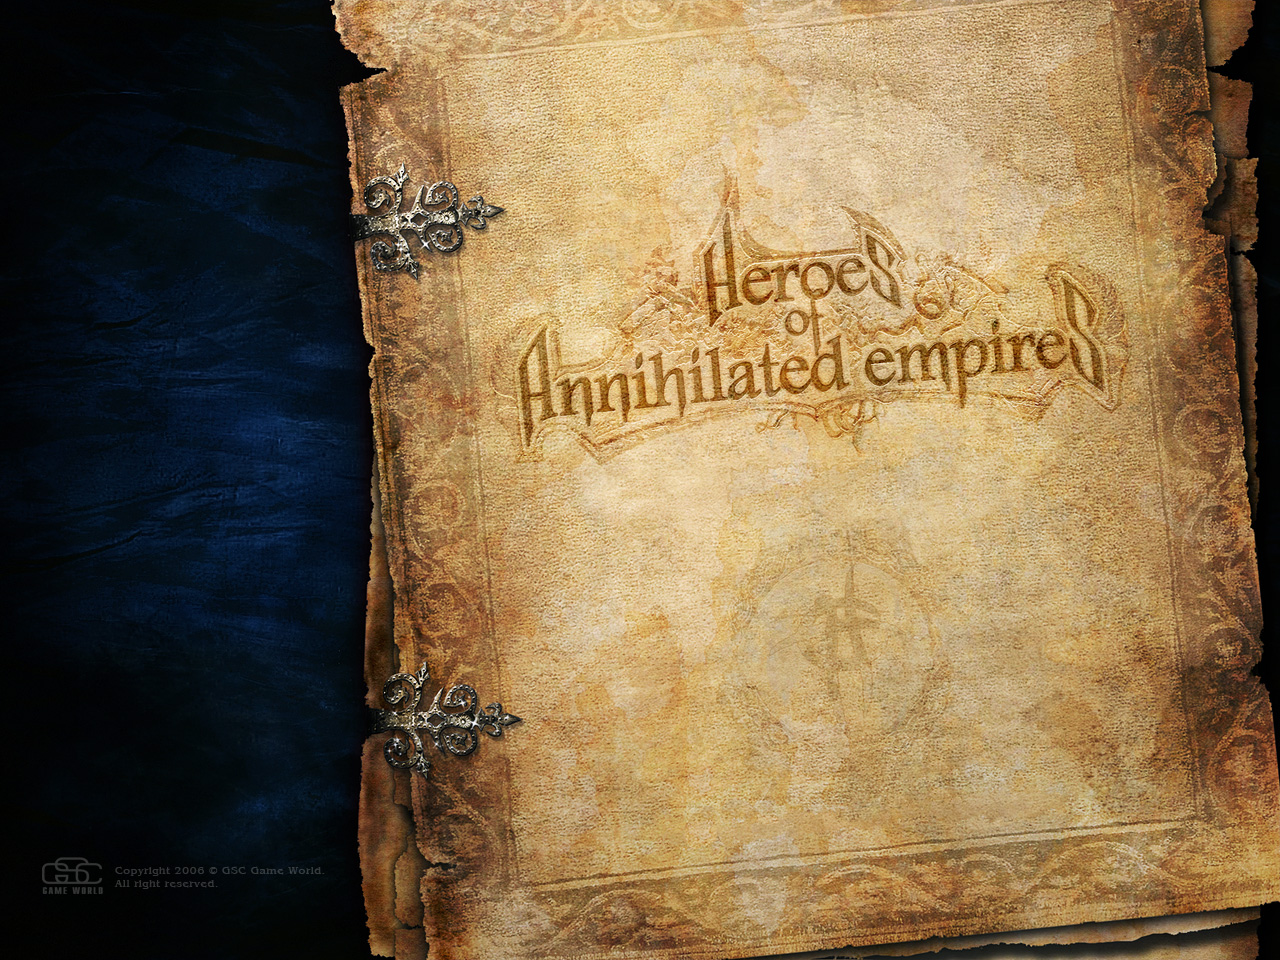 Heroes_of_annihilated_empires_03_1280x960.jpg